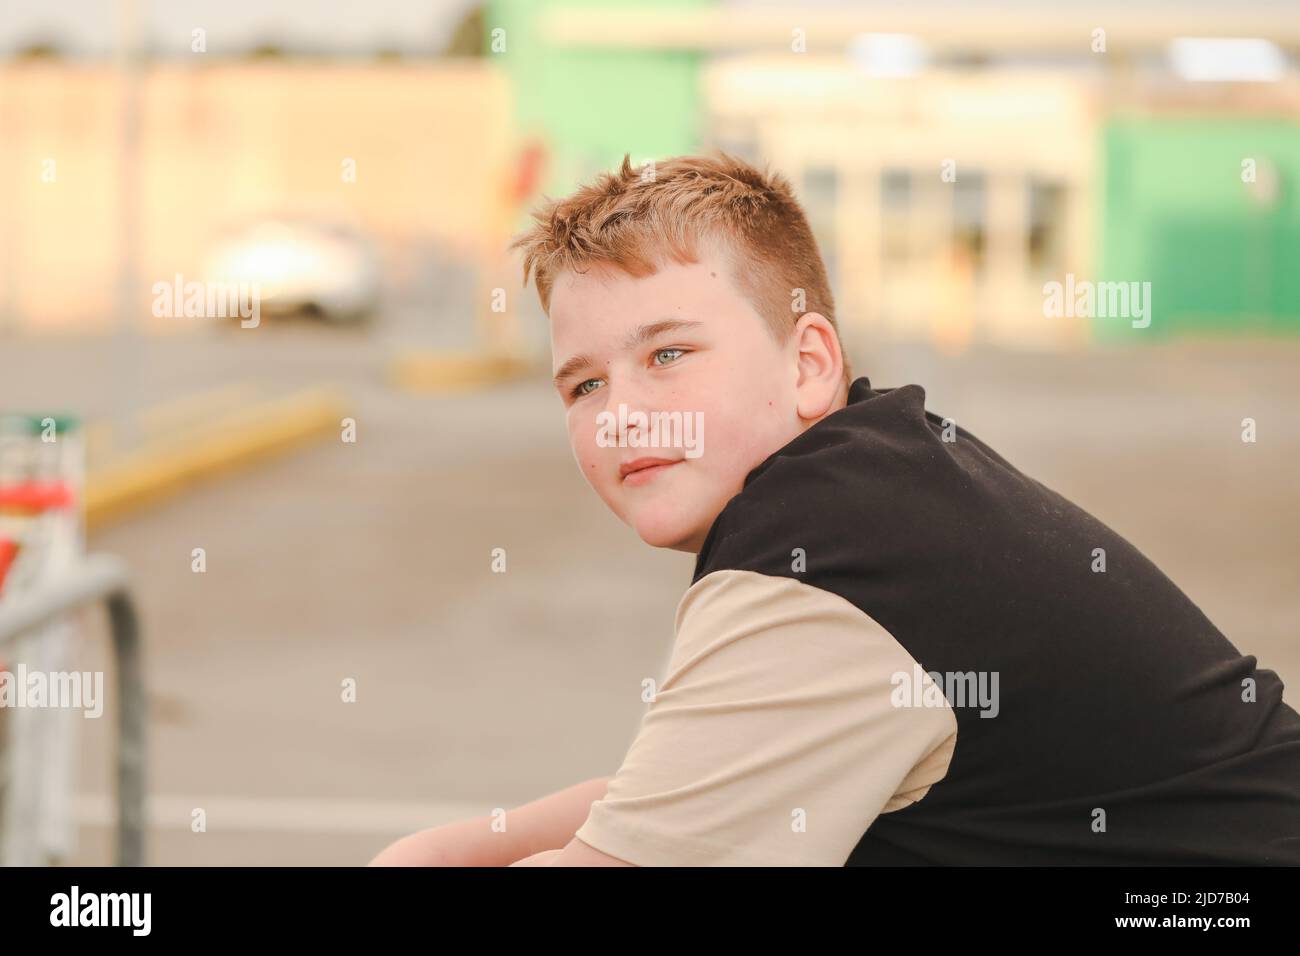 Relaxed preteen boy hanging out in urban car park. Blonde hair blue eyes. Stock Photo